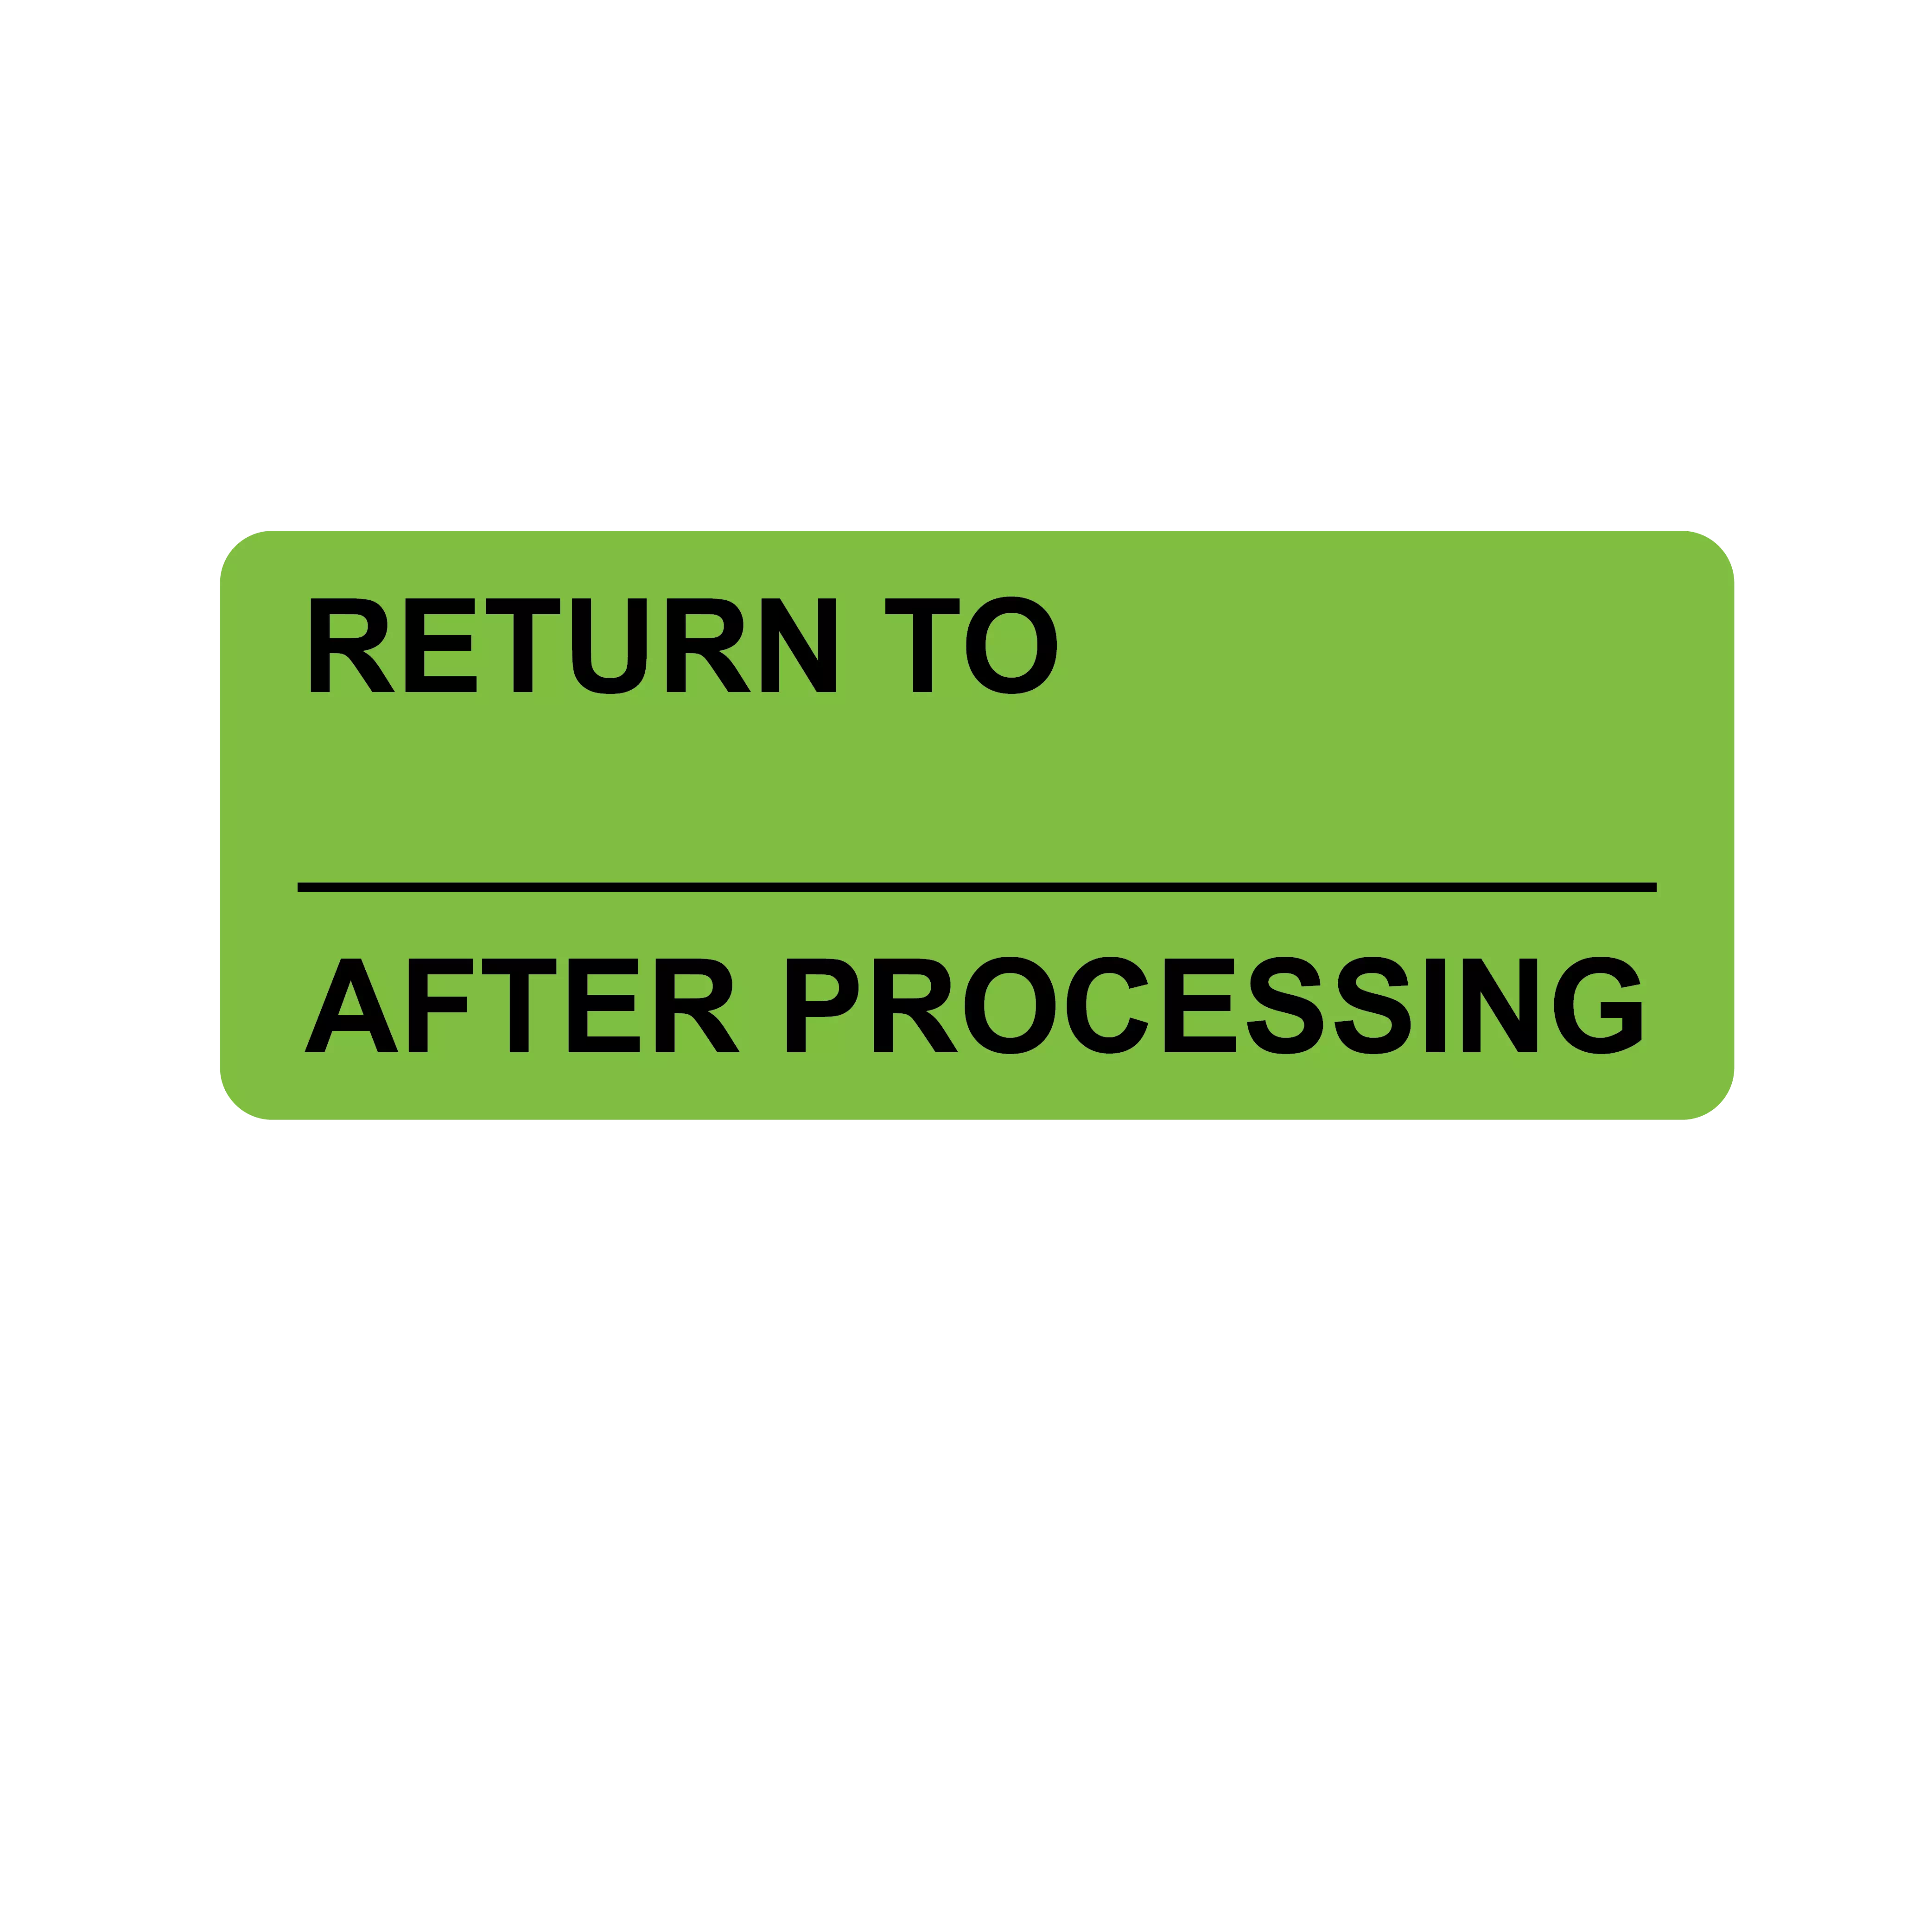 Return to ____ After Processing